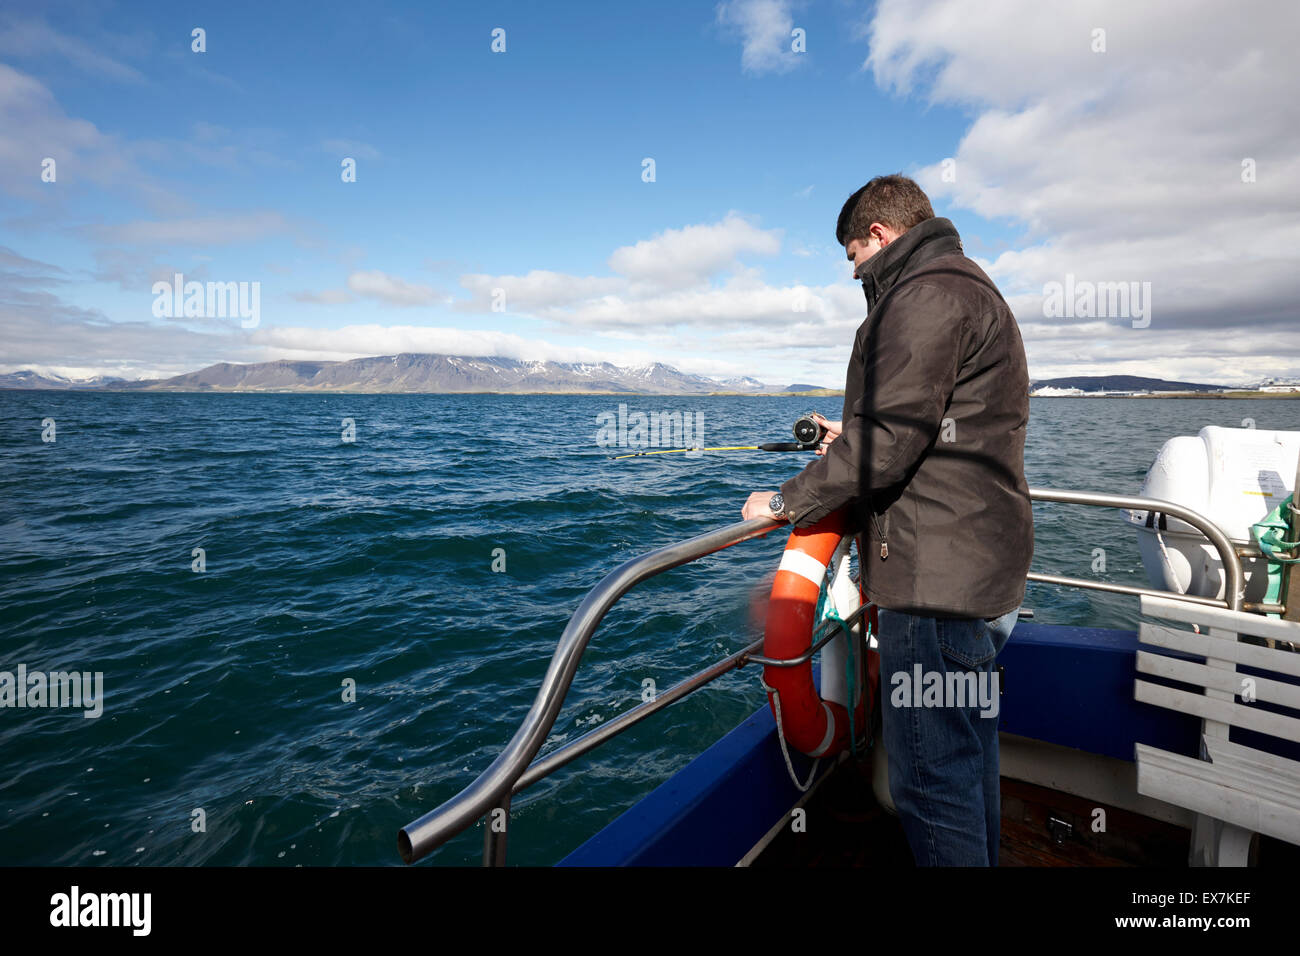 man seafishing with a rod and line on a charter boat Reykjavik iceland Stock Photo